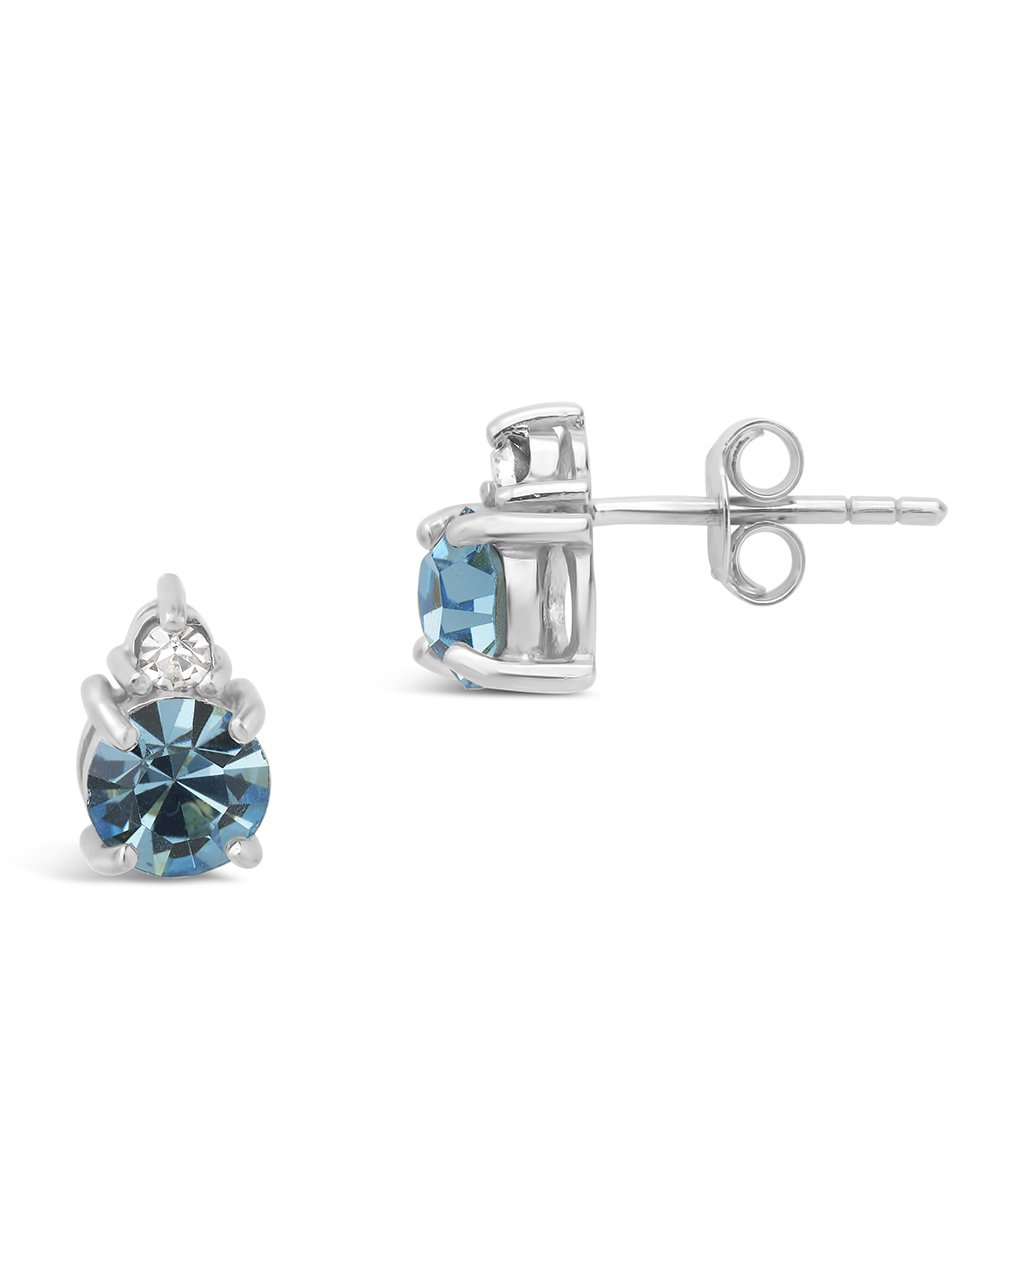 Sterling Silver Birthstone Studs Earring Sterling Forever Silver March / Aquamarine 